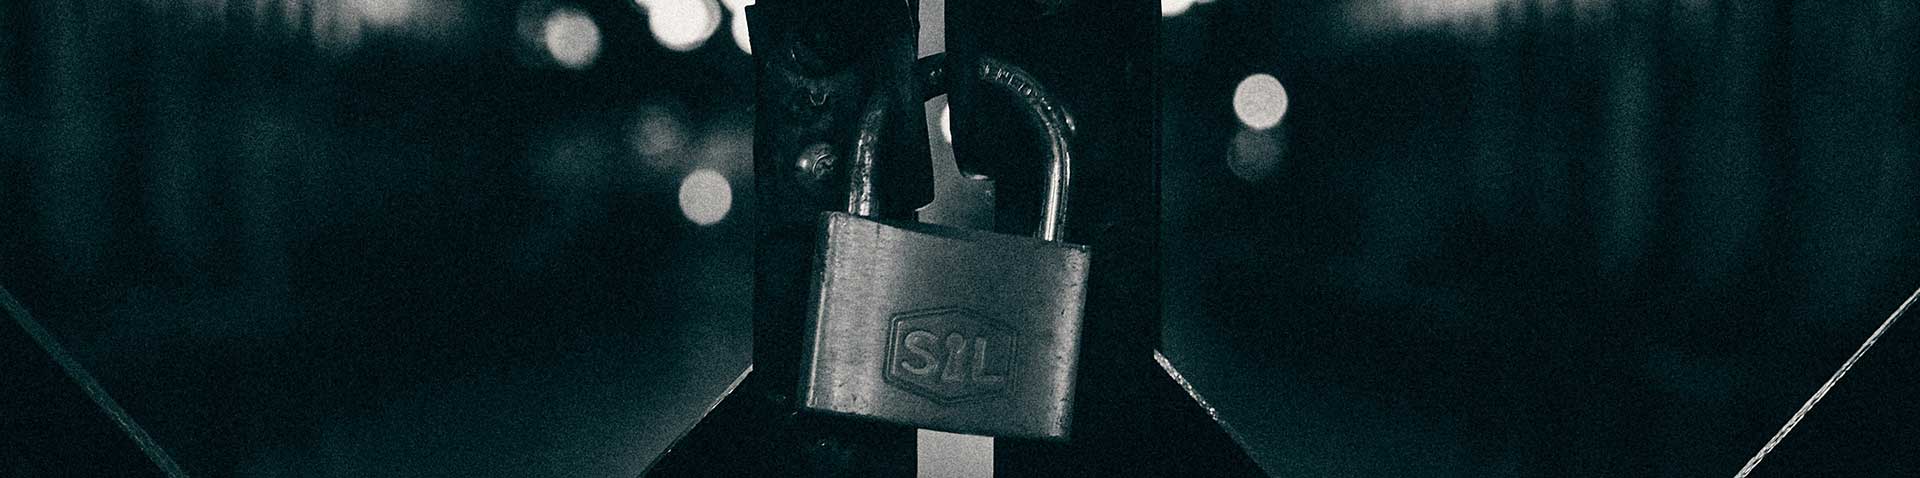 Lock as a symbolic image for open source vs. commercial